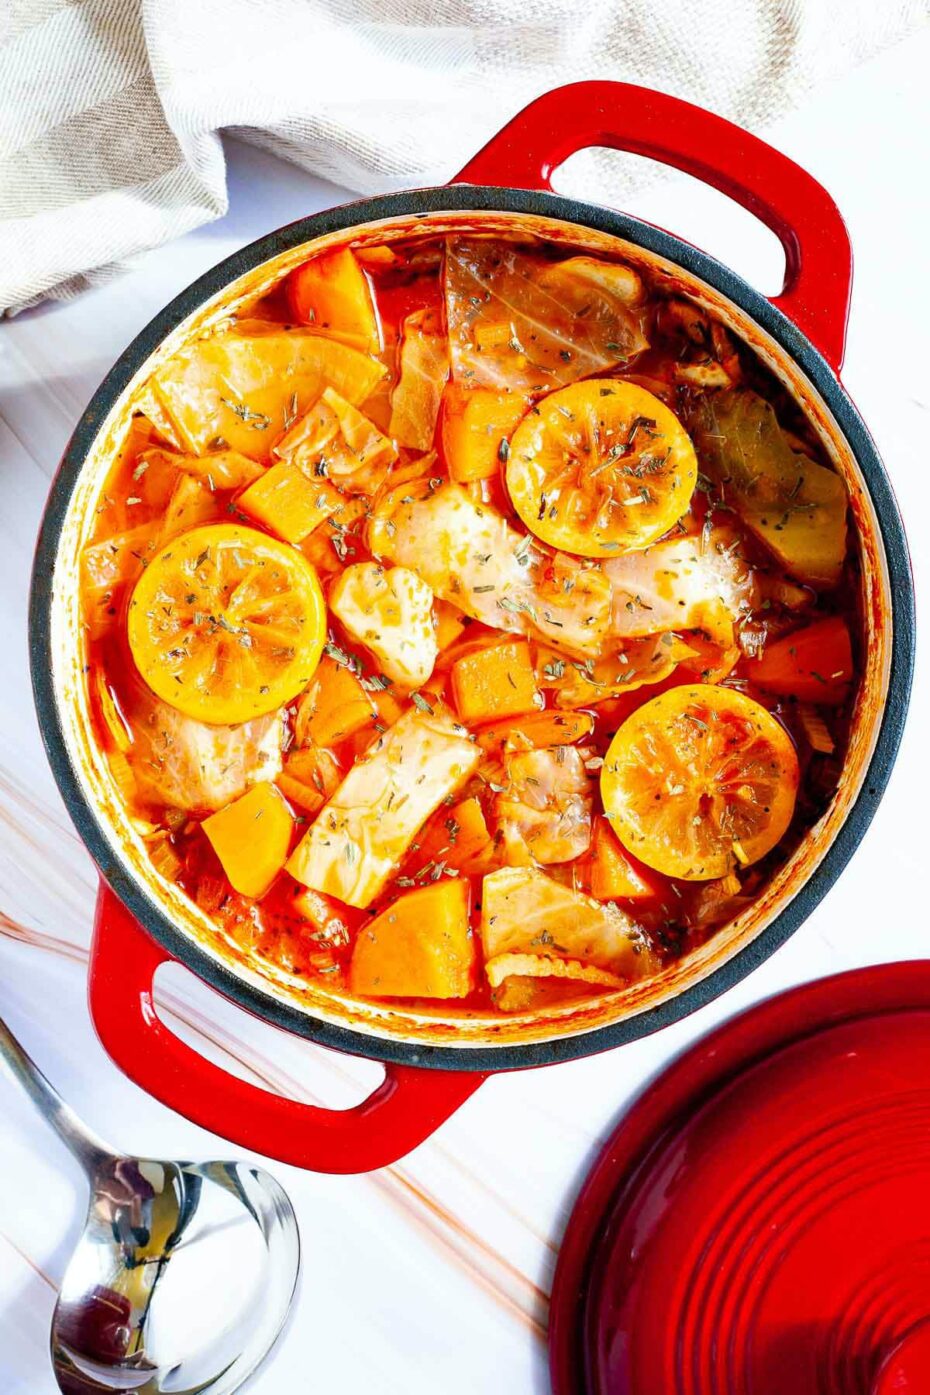 Red dutch oven with red tomato-based soup and chopped vegetables like cabbage, orange sweet potato, celery stalk slices, topped with lemon slices and dried green herbs